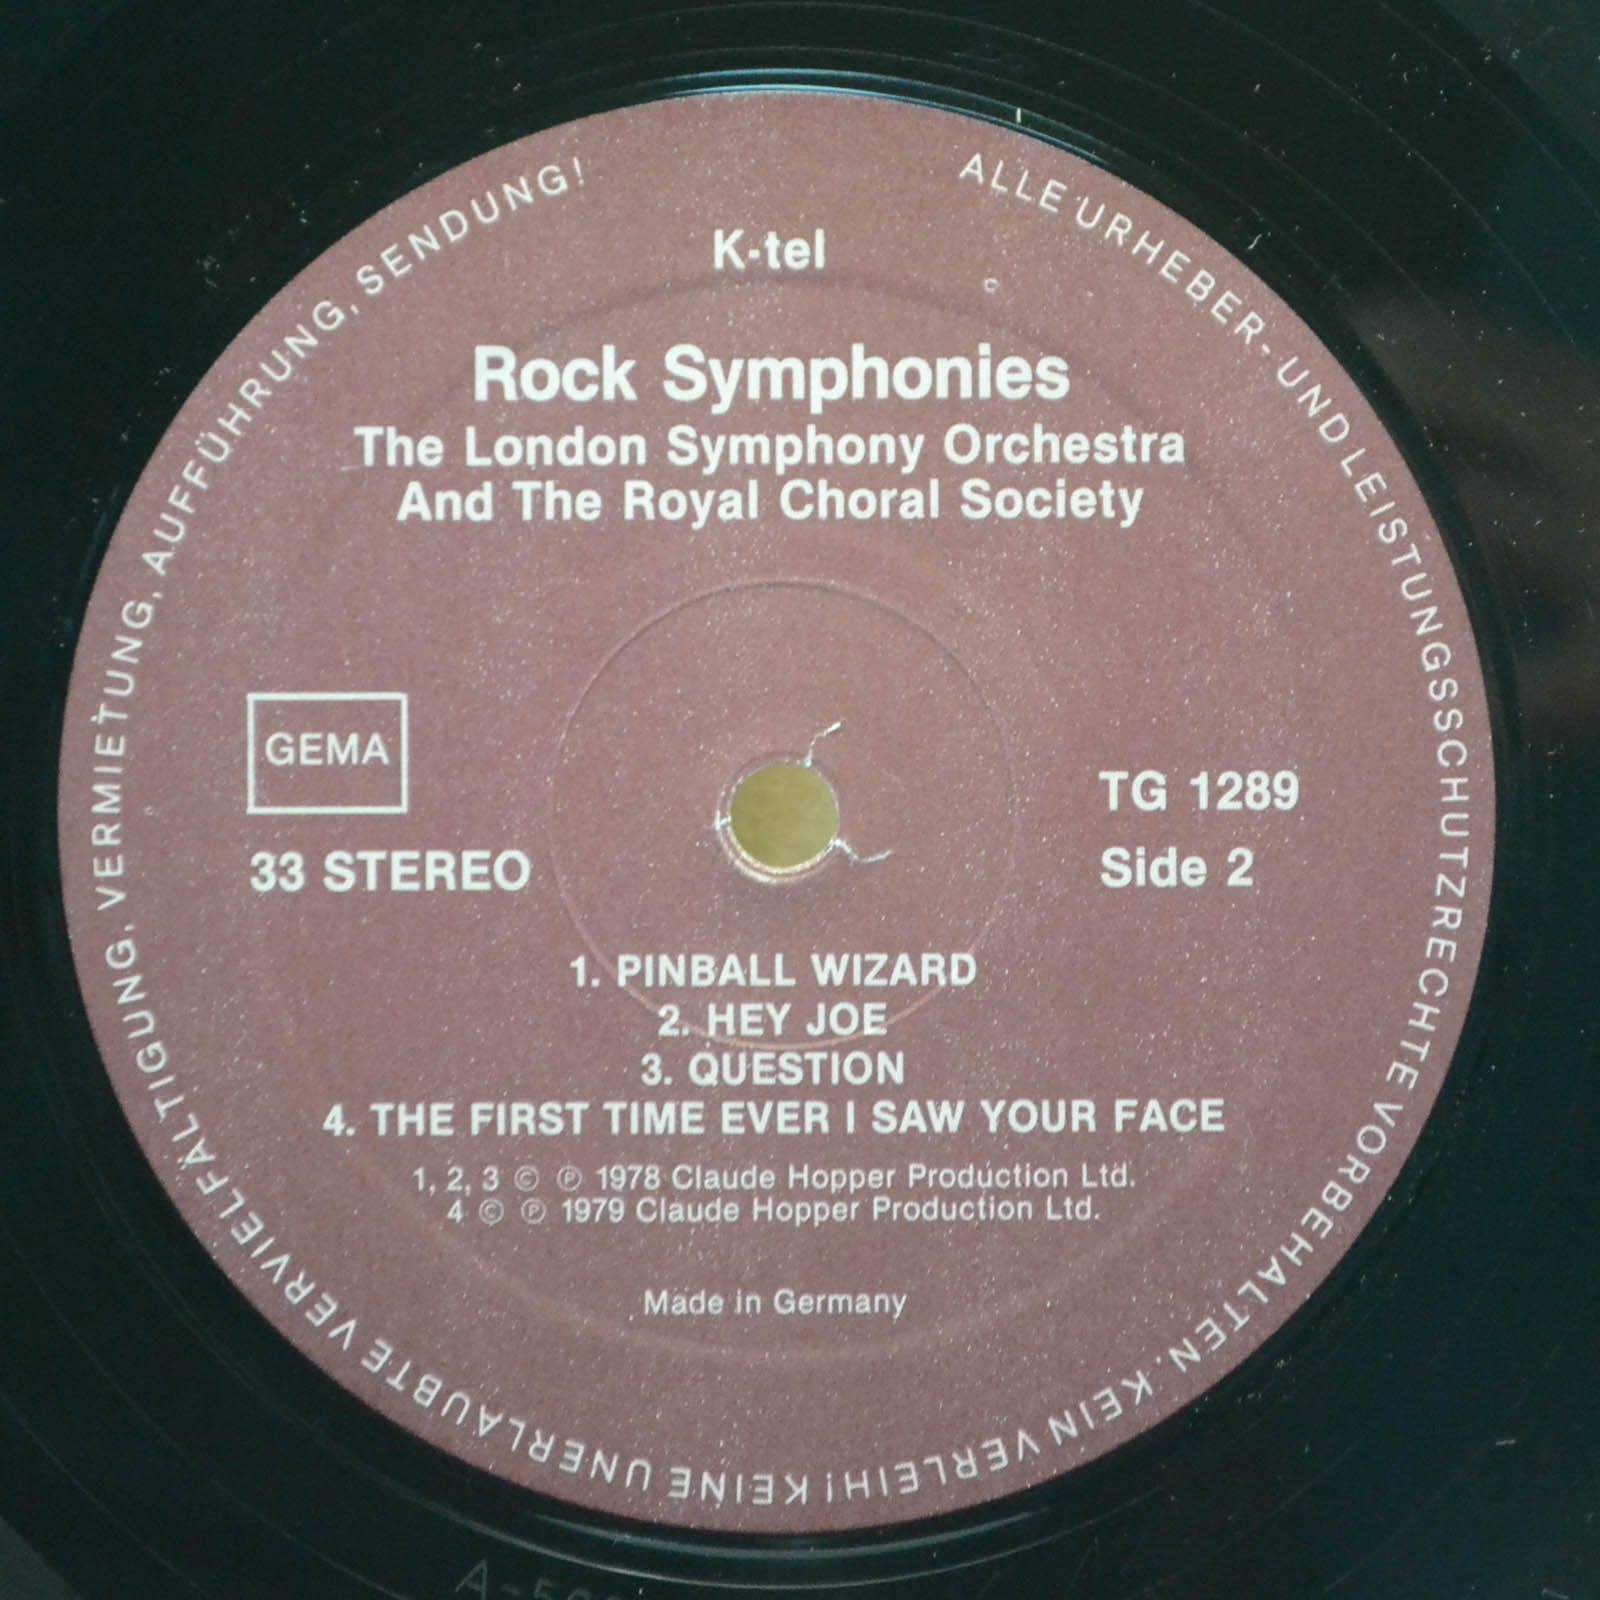 London Symphony Orchestra And The Royal Choral Society — Rock Symphonies - Ein Dramatisches Klangerlebnis, 1980